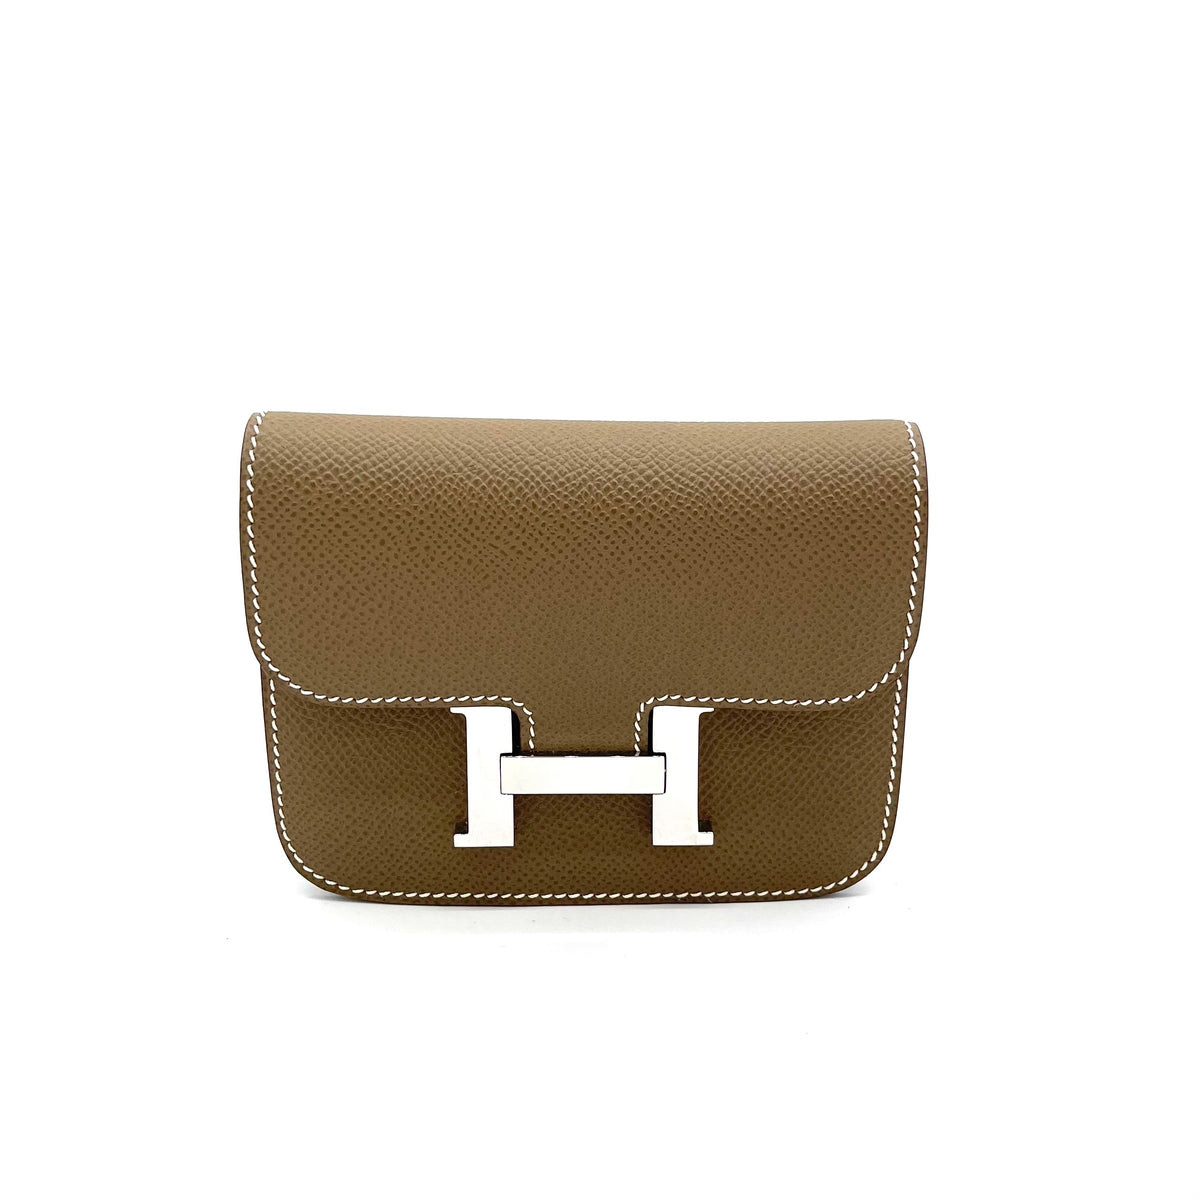 HERMES Etoupe Constance Slim Wallet Silver with Strap and Attachable to belt